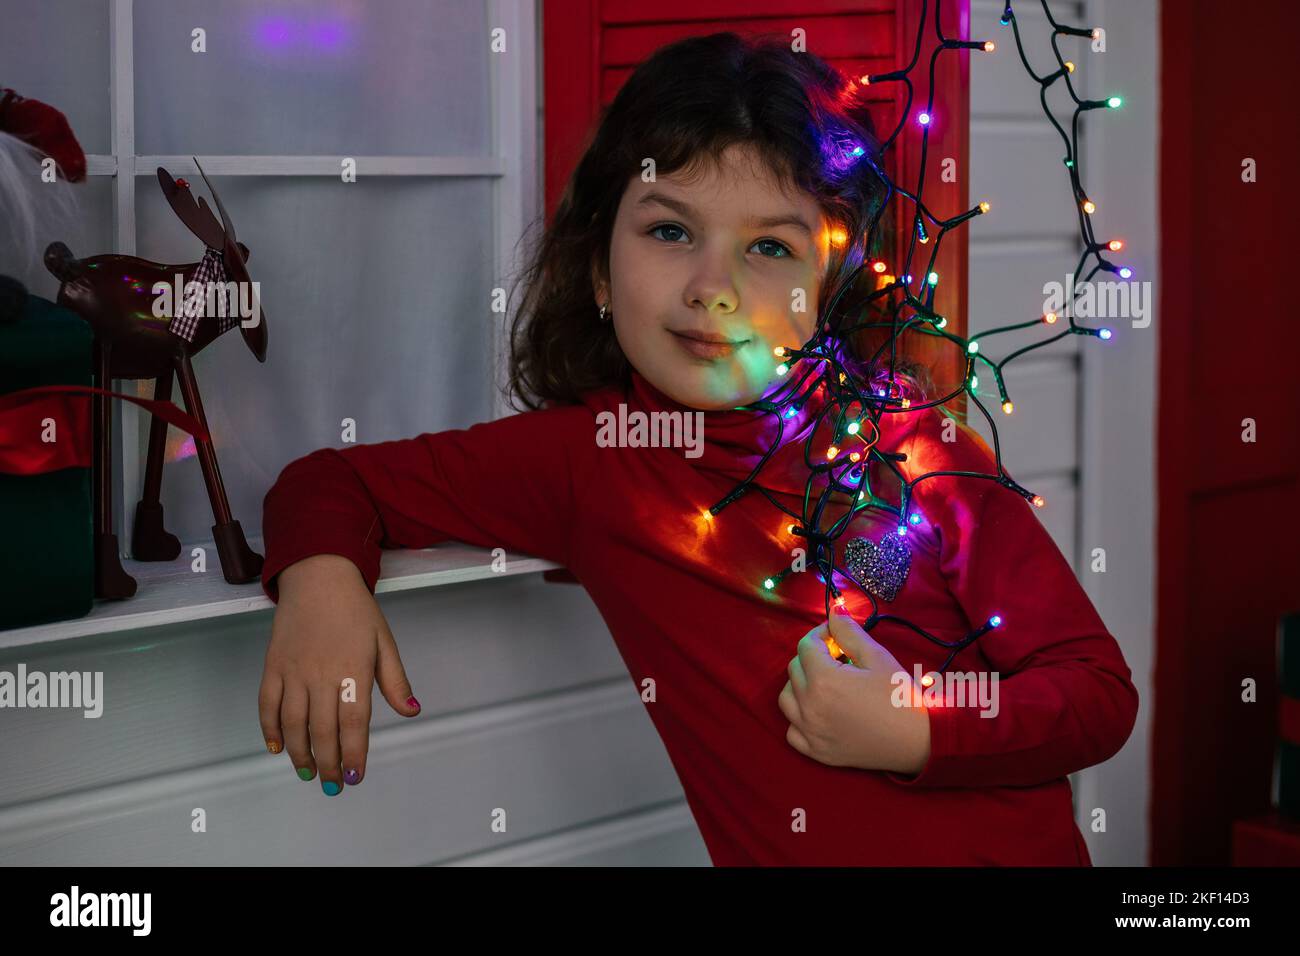 Cute little girl in red outfit hold festive colored garland leaning arm on wall. Bright lights shine in dark room. Portrait of child in decorated room Stock Photo